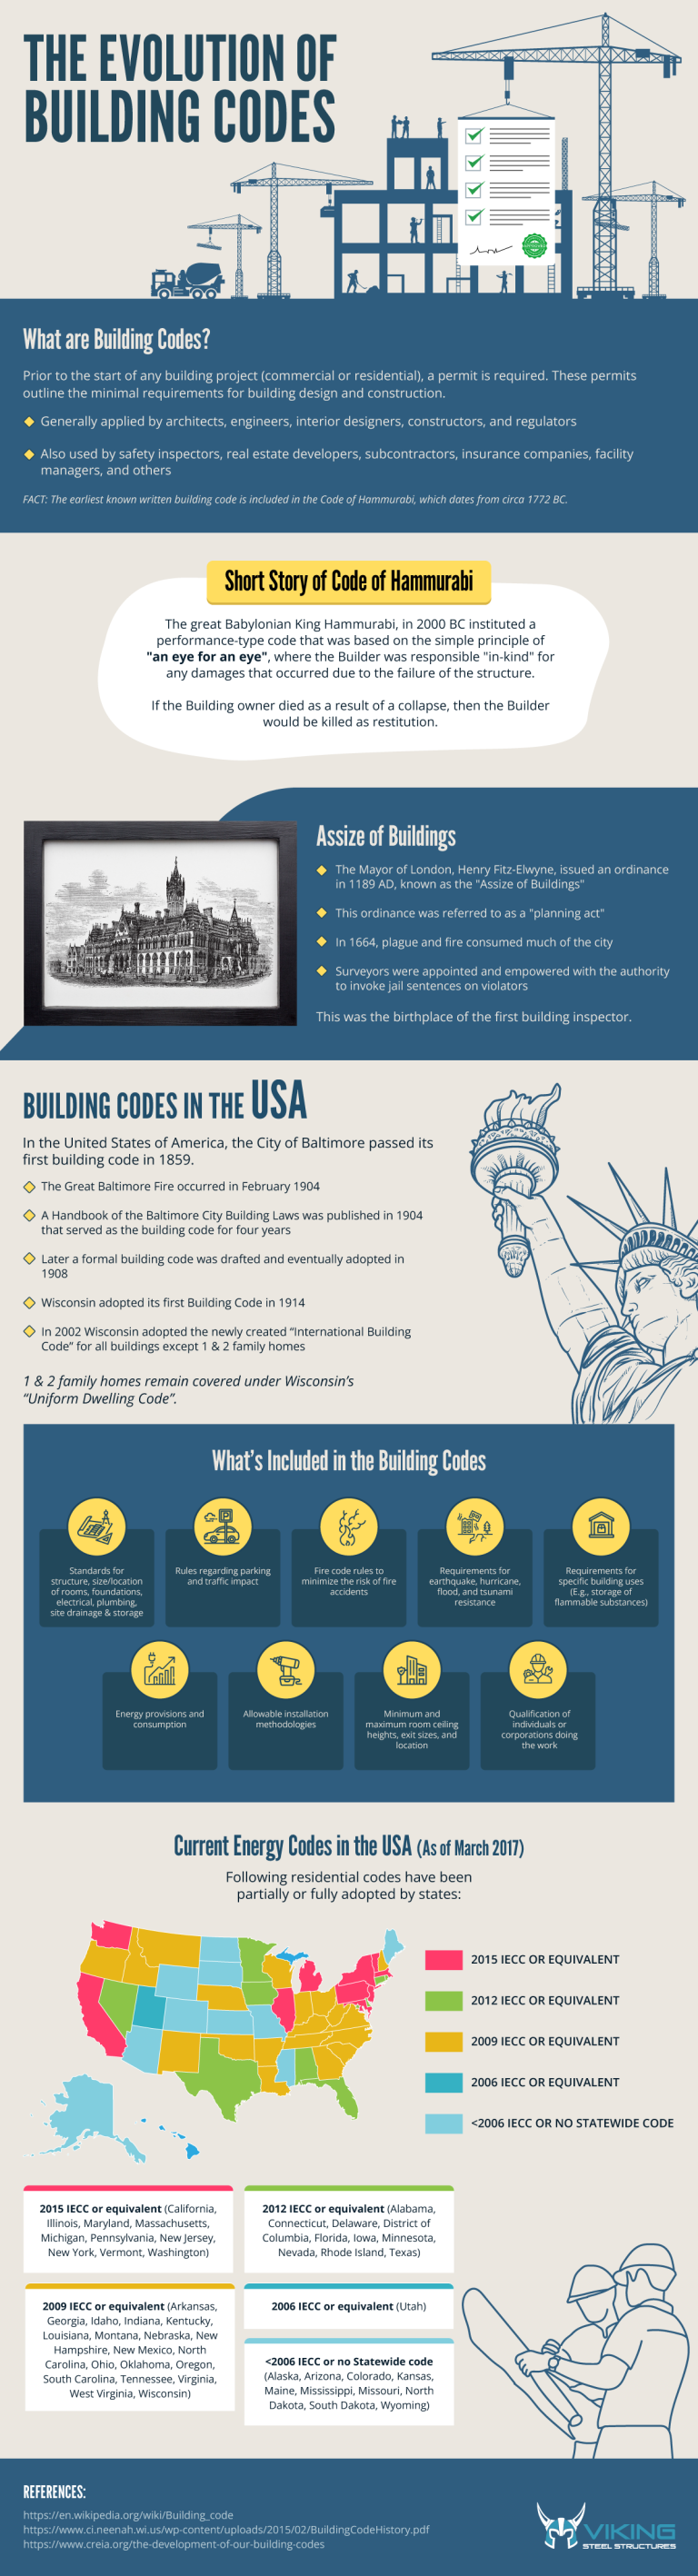 The Evolution of Building Codes